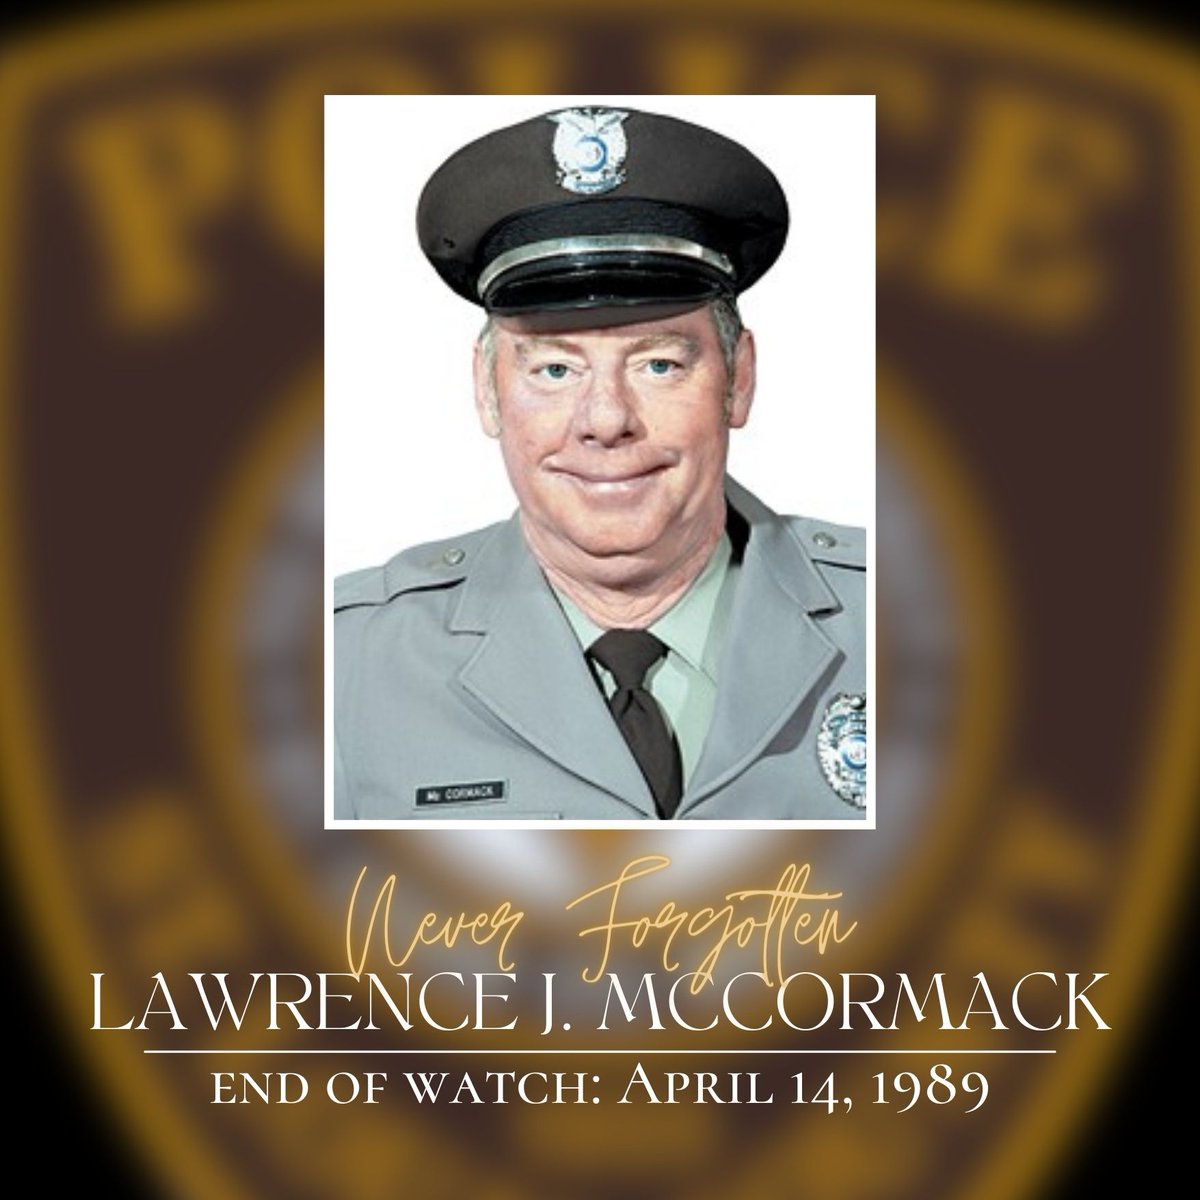 Never Forgotten. Today, we honor the memory of Det. Larry McCormack, who died in the line of duty on April 14, 1989. He will never be forgotten. stlouiscountypolice.com/who-we-are/nev…